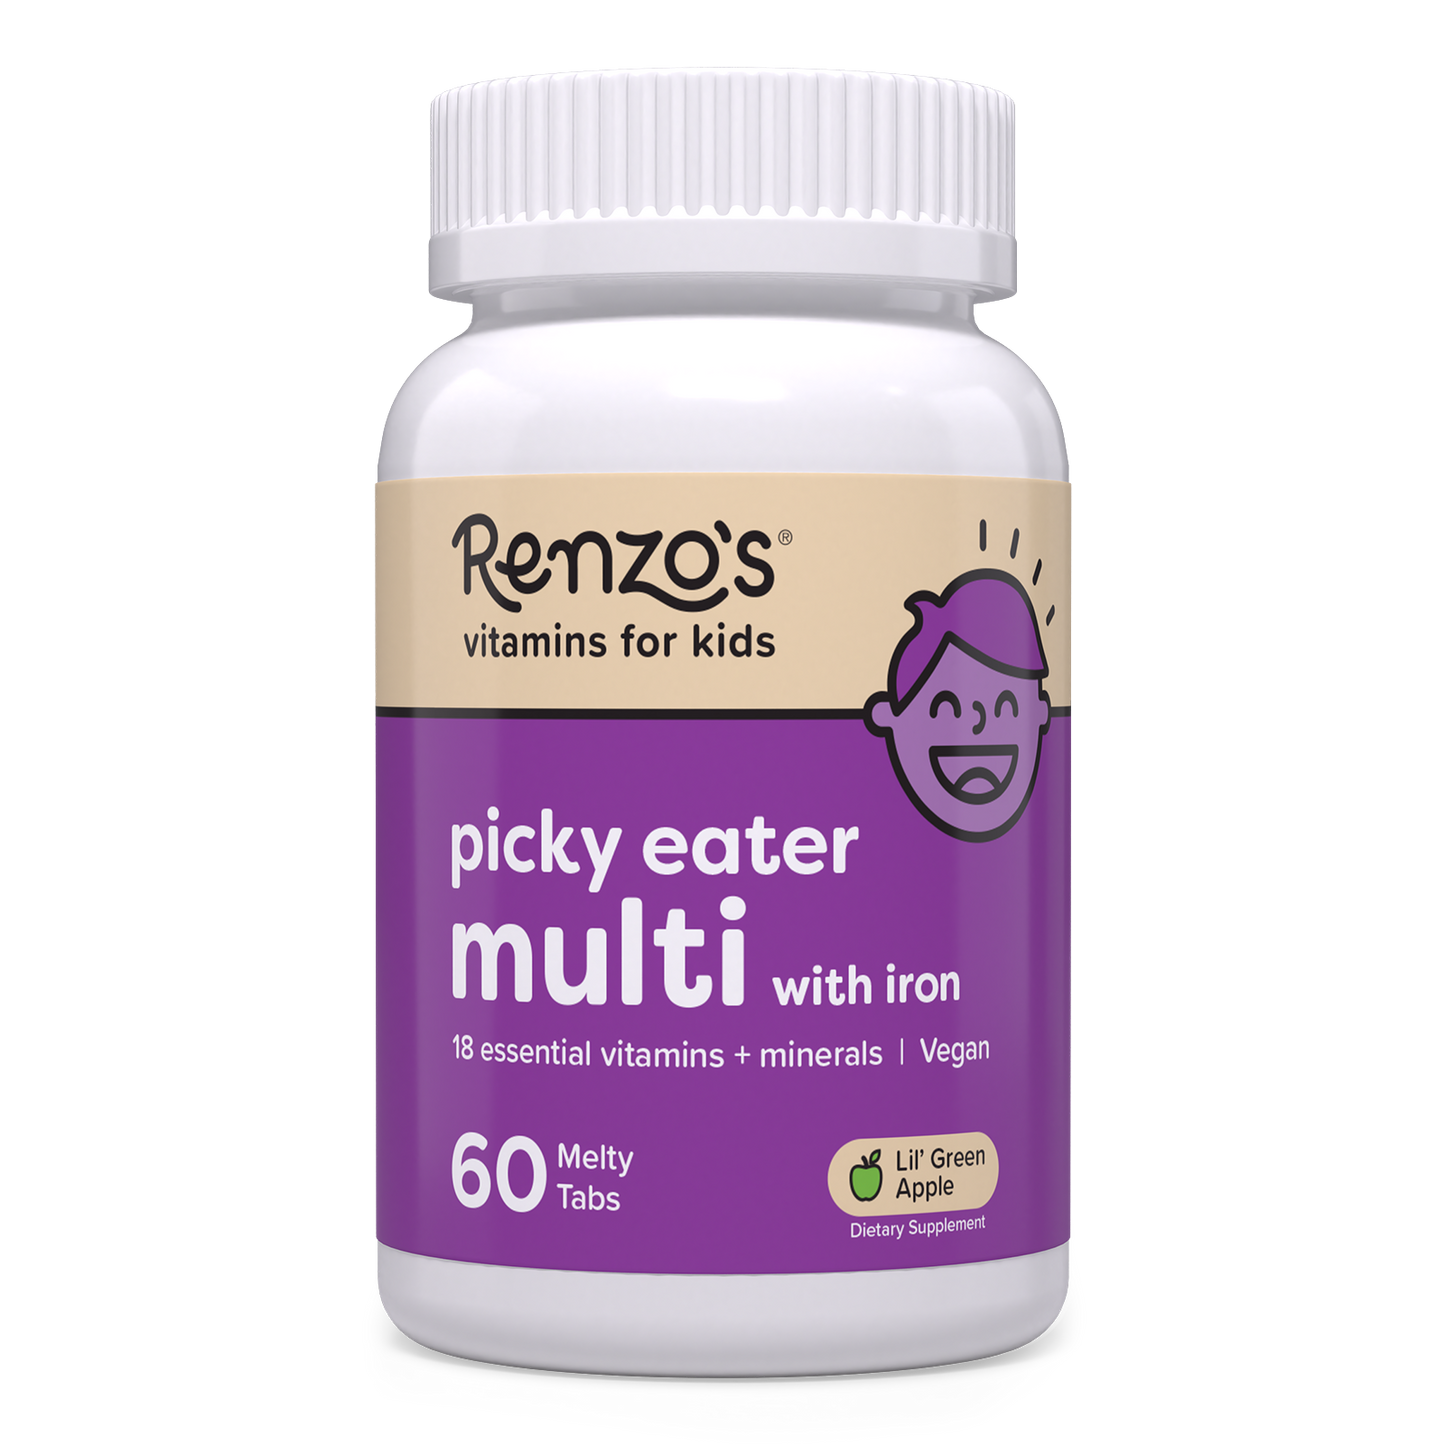 Renzo's Vitamins apple-flavored childrens multivitamin for picky eaters bottle upright on a white surface